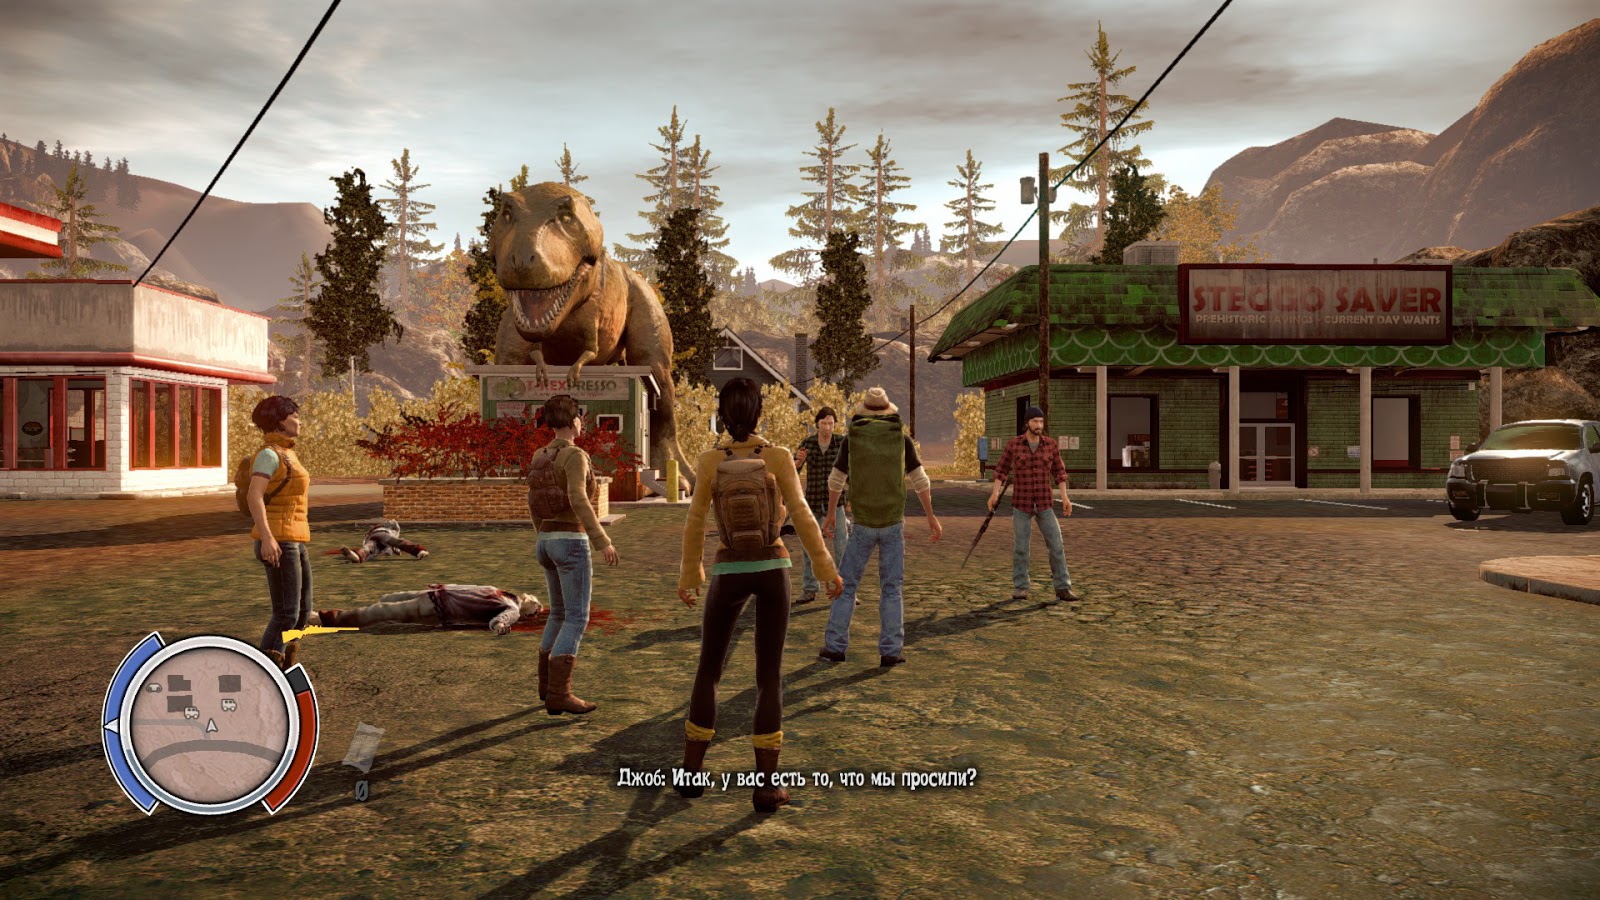 Игра давай россия. State of Decay 1. State of Decay: year one Survival Edition. Стейт оф Дикей 3.